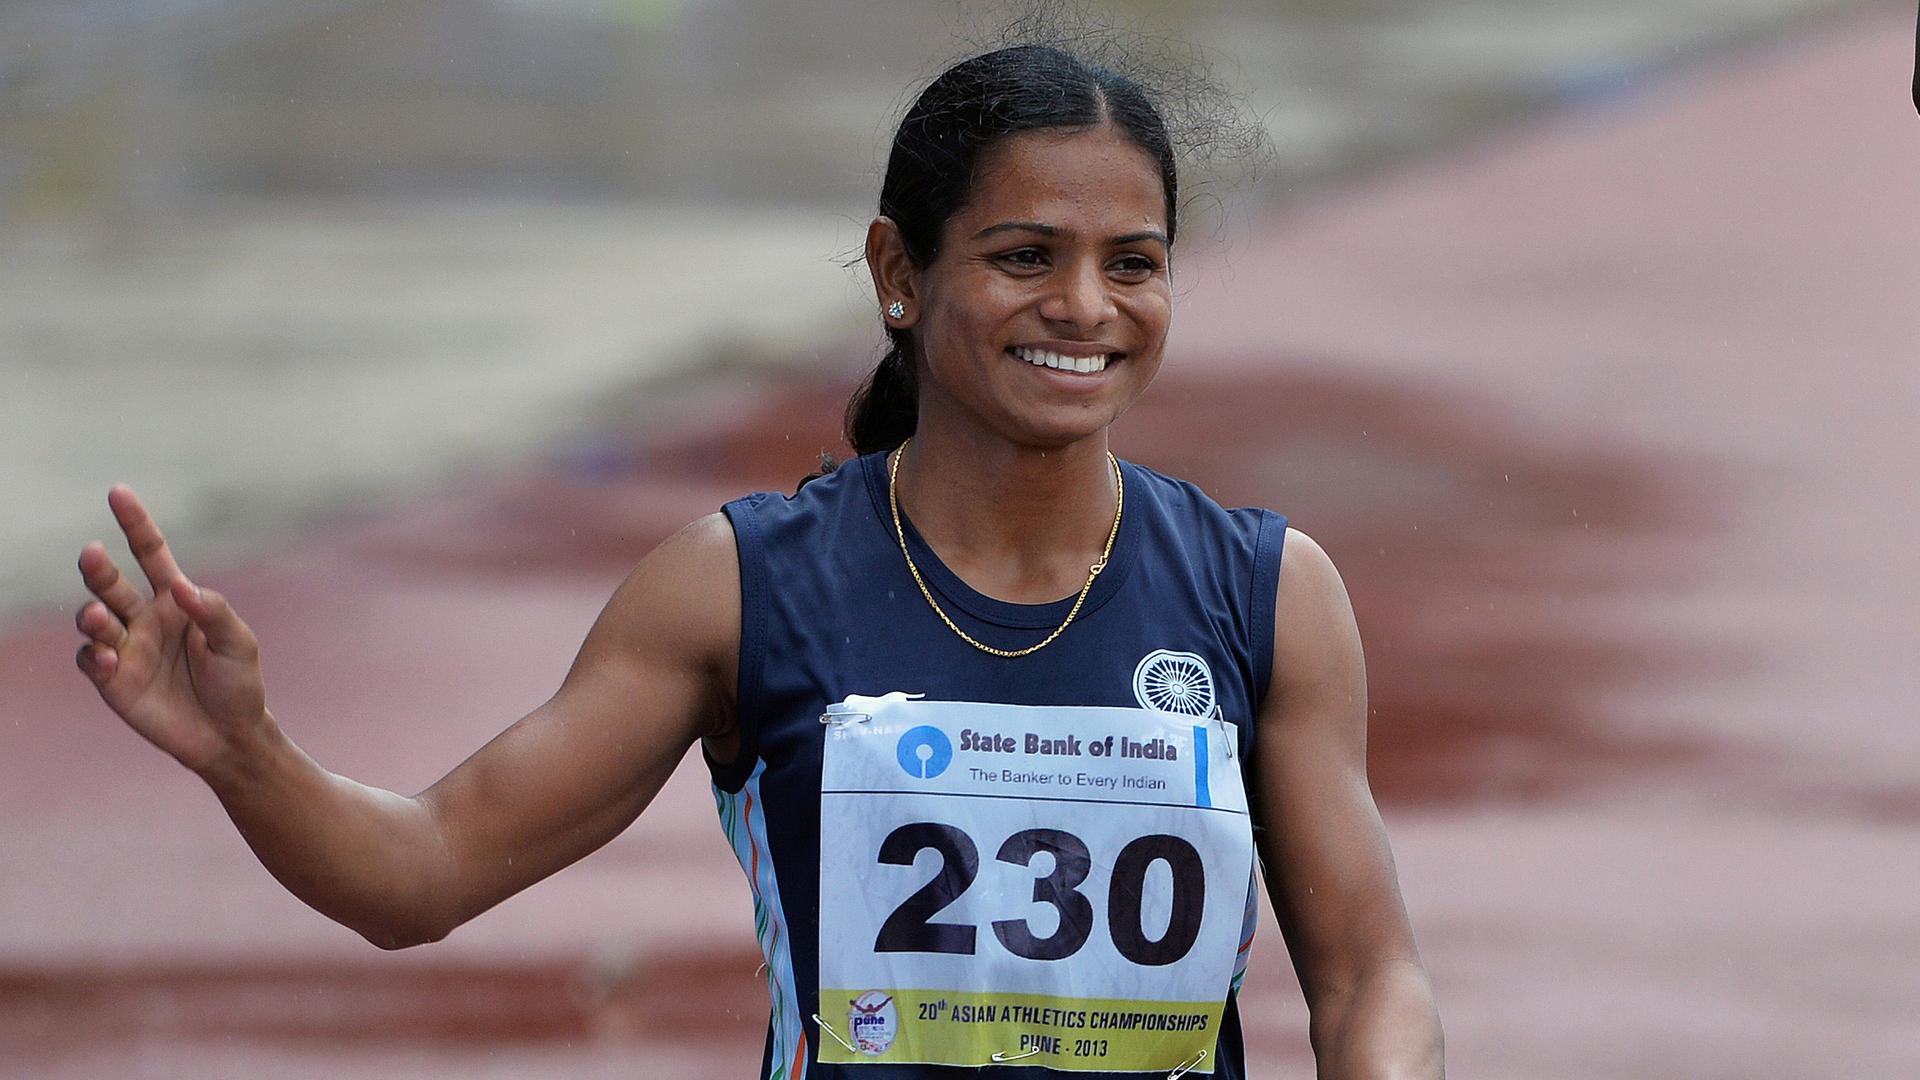 Dutee Chand after winning the bronze medal in the women's 200 meters at the 2013 Asian Athletics Championship 2013.